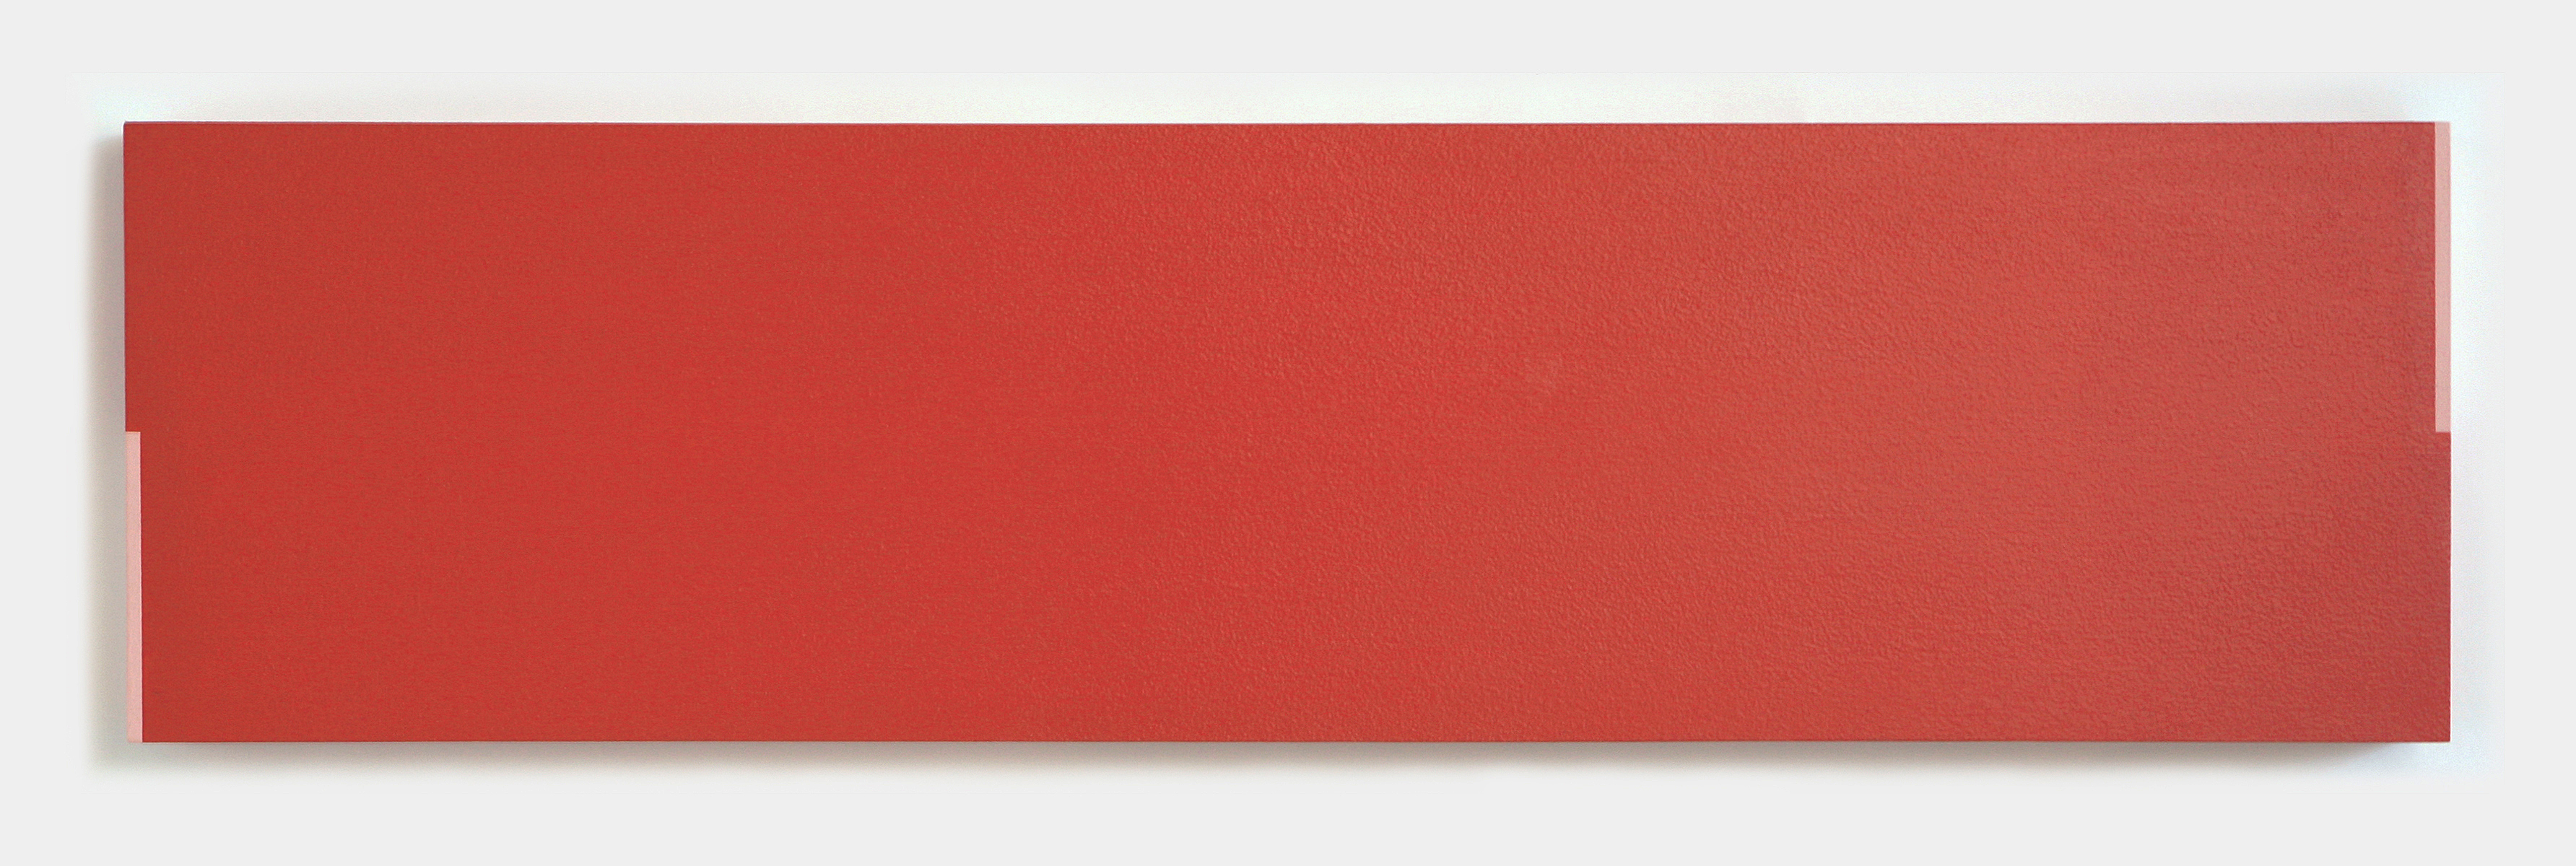 A long rectangular red painting with thin pink rectangles painted on two corners.